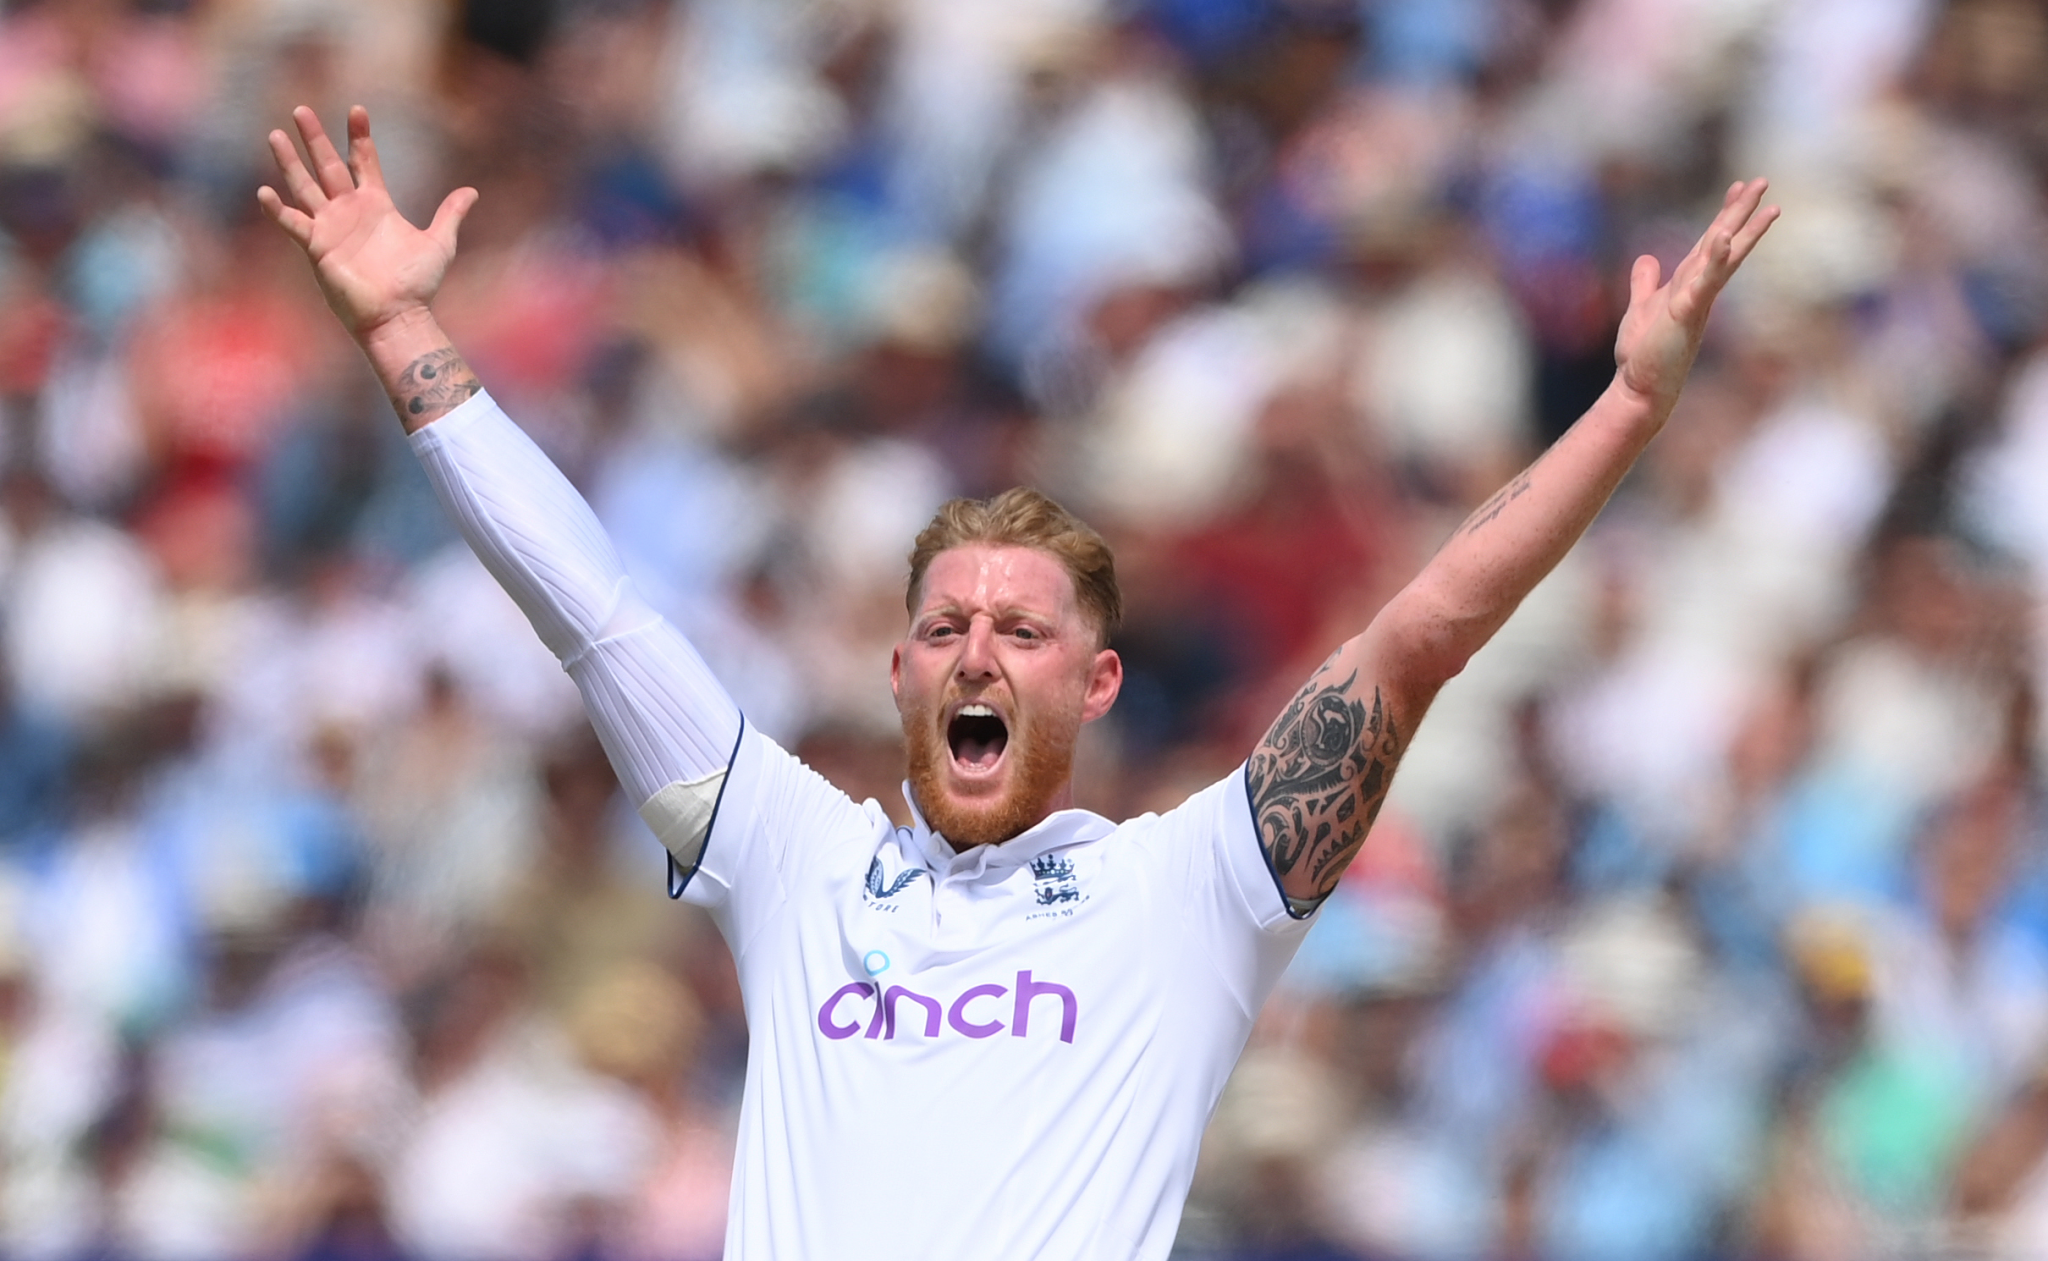 England captain Ben Stokes has been at the forefront of the Bazball revolution ©Getty Images